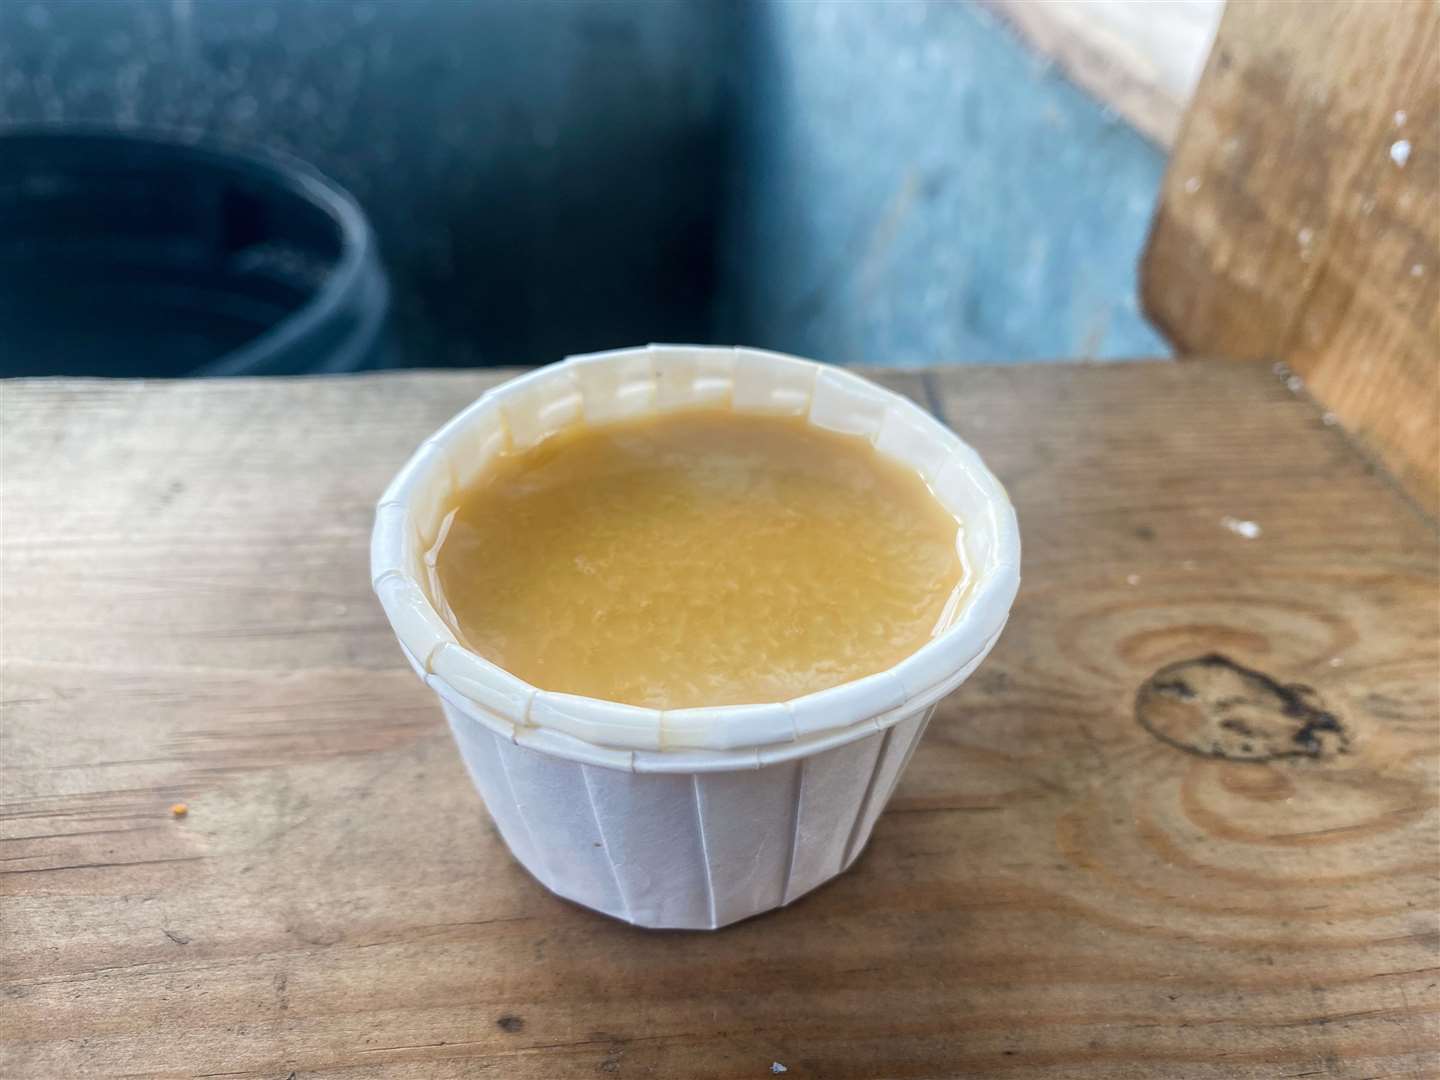 The Christmas pudding shot looked more like curry sauce when it was served up in a dipping pot